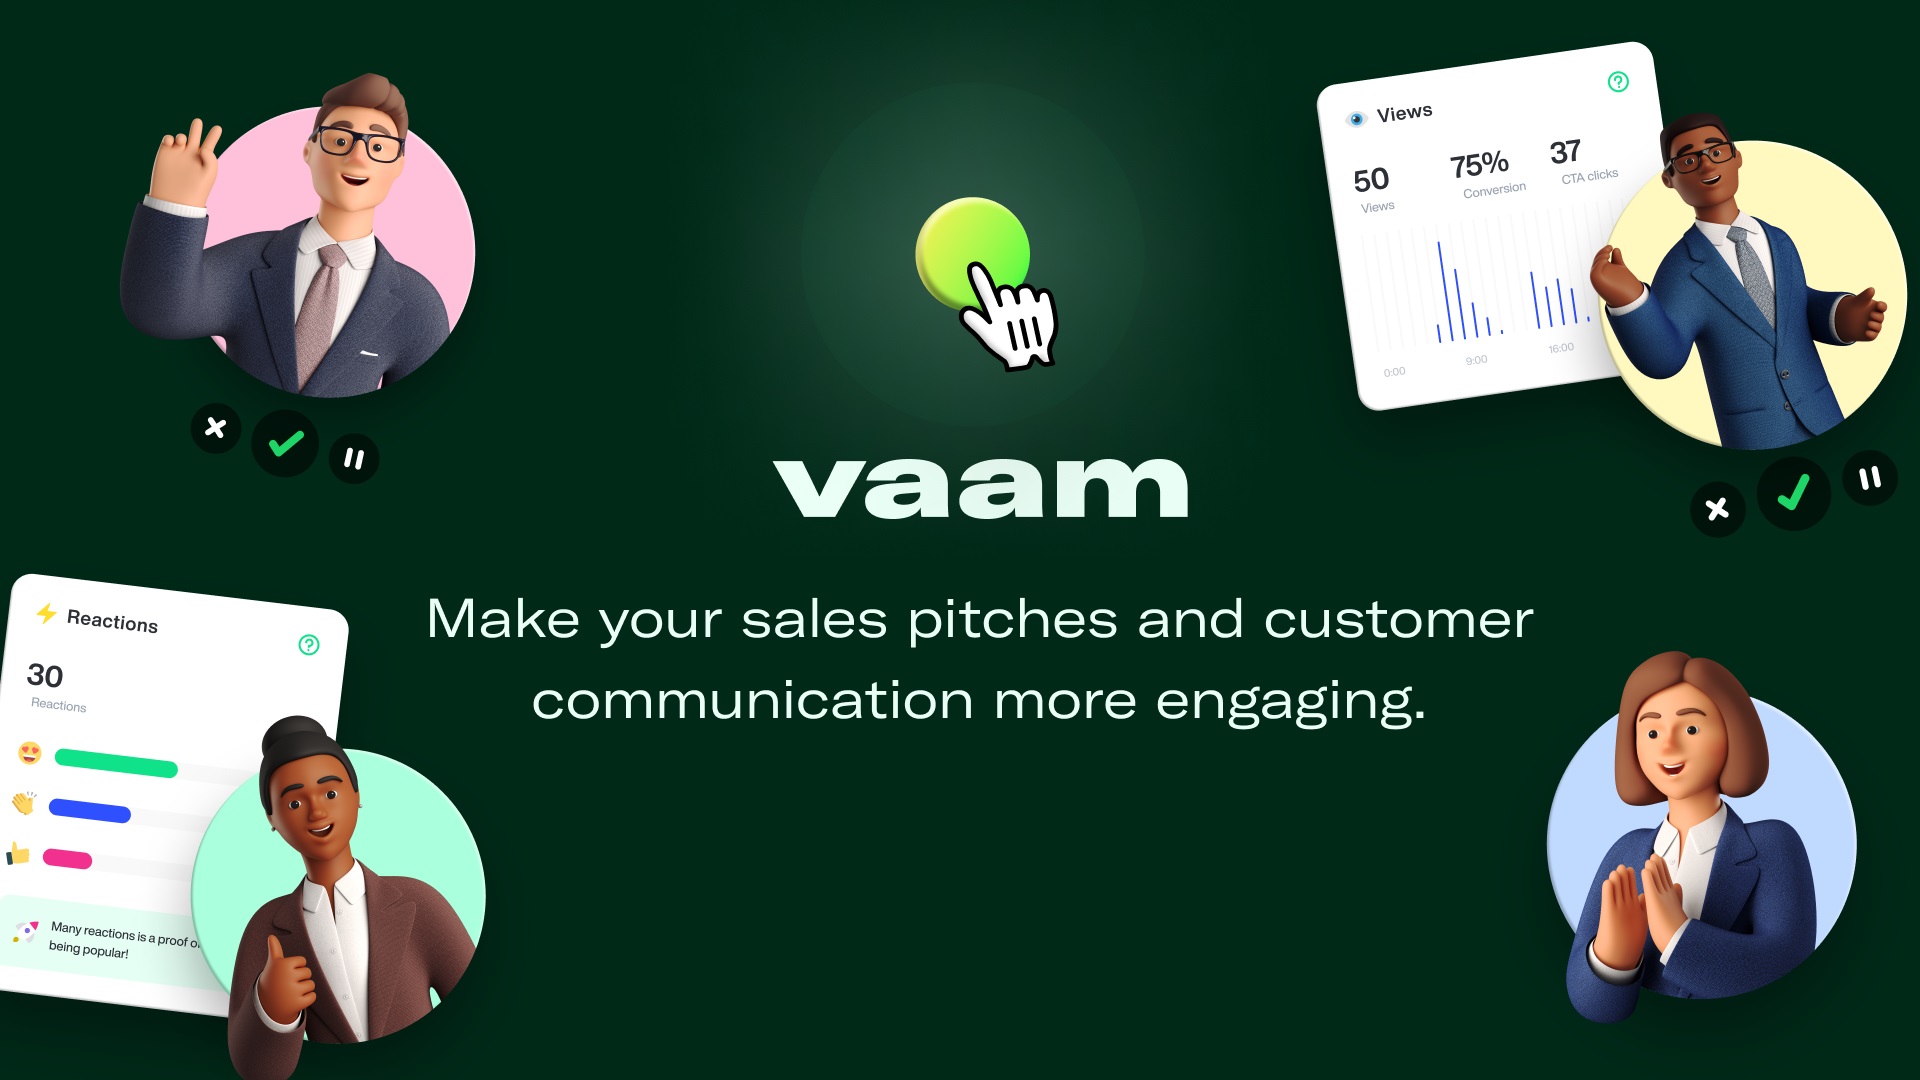 Find detailed information about Vaam